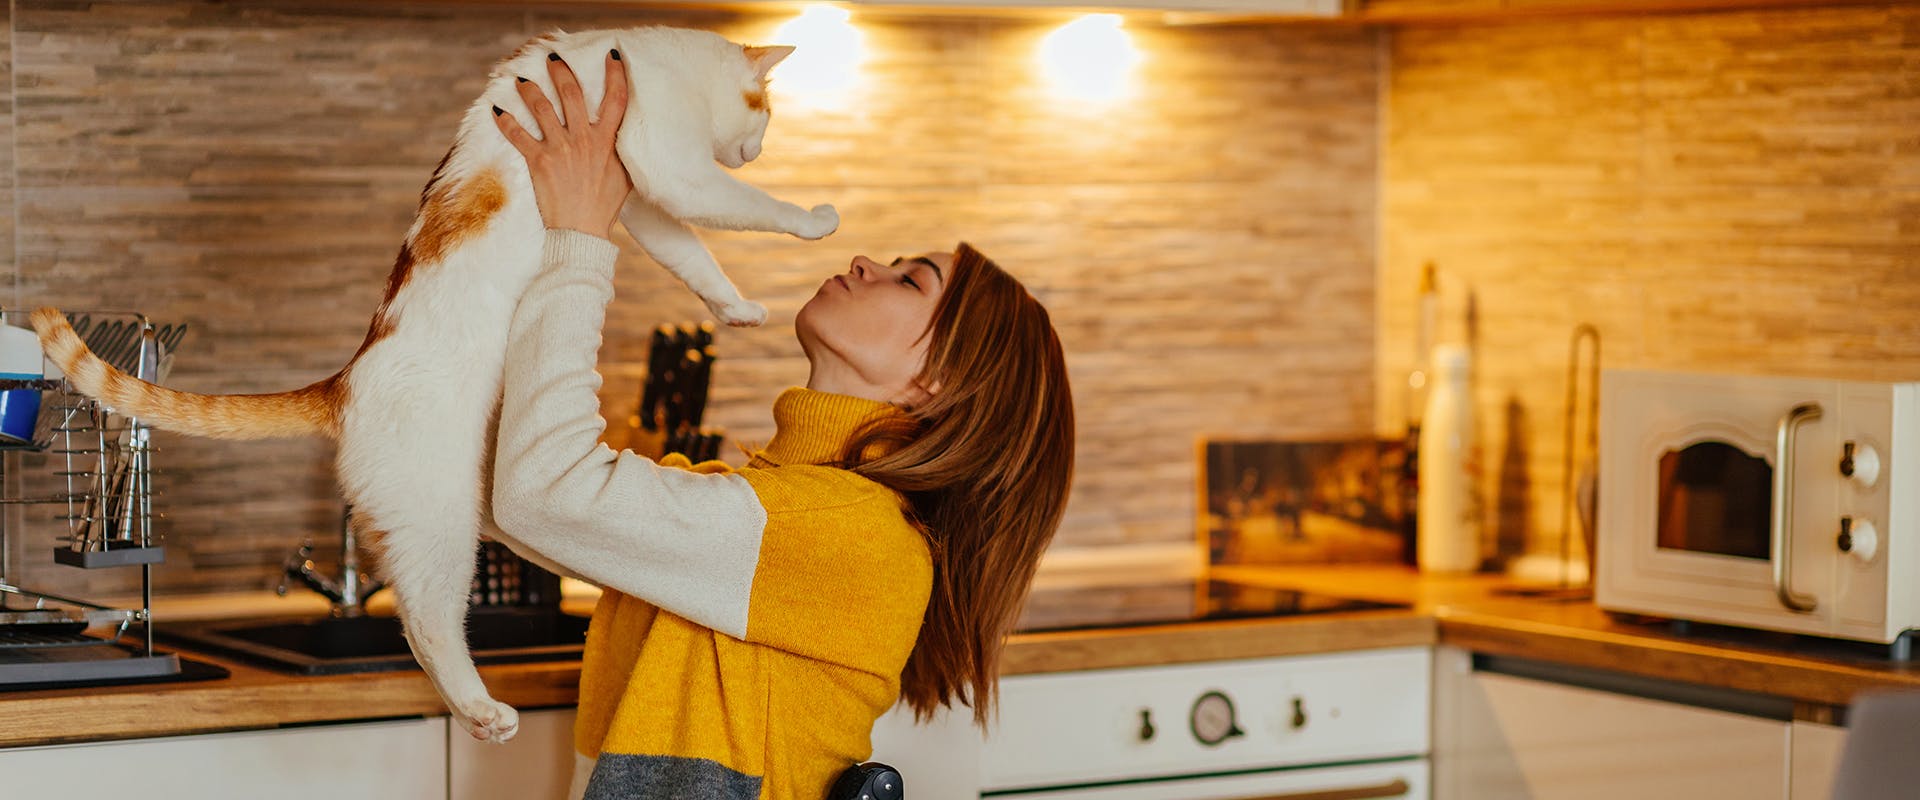 A woman in a kitchen holding up a white and ginger cat